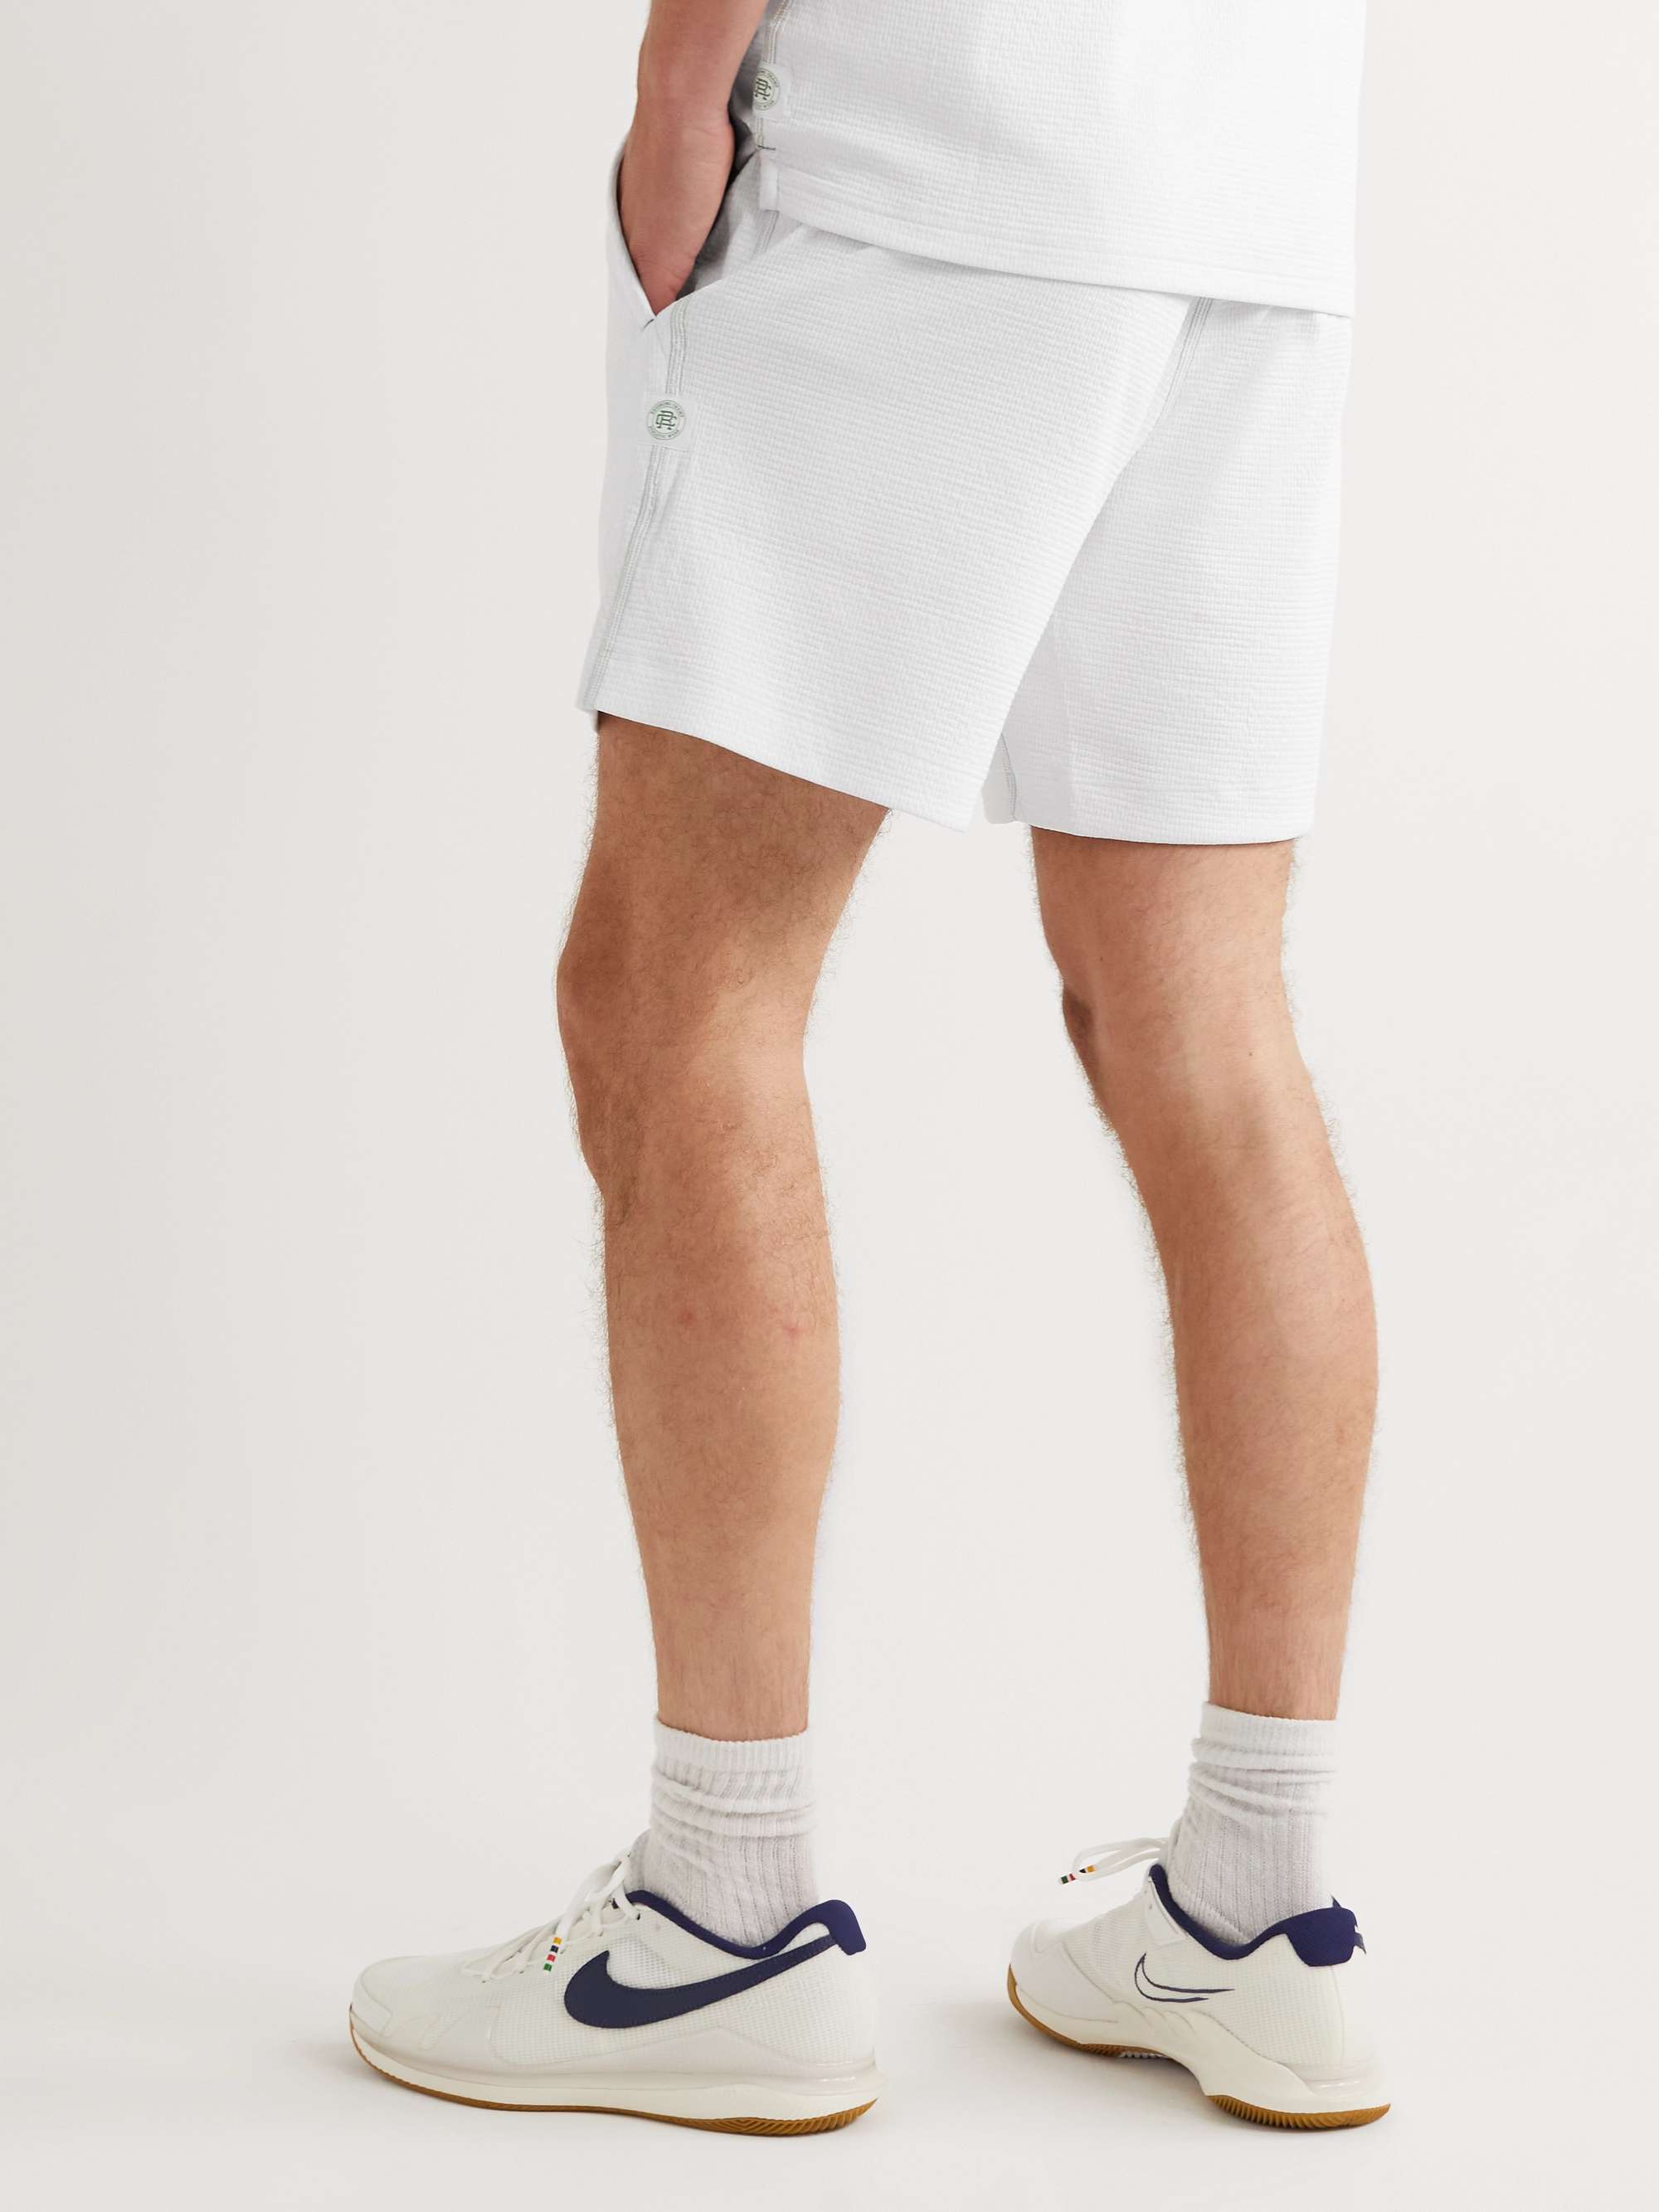 REIGNING CHAMP + Prince Logo-Embroidered Solotex Mesh Tennis Shorts